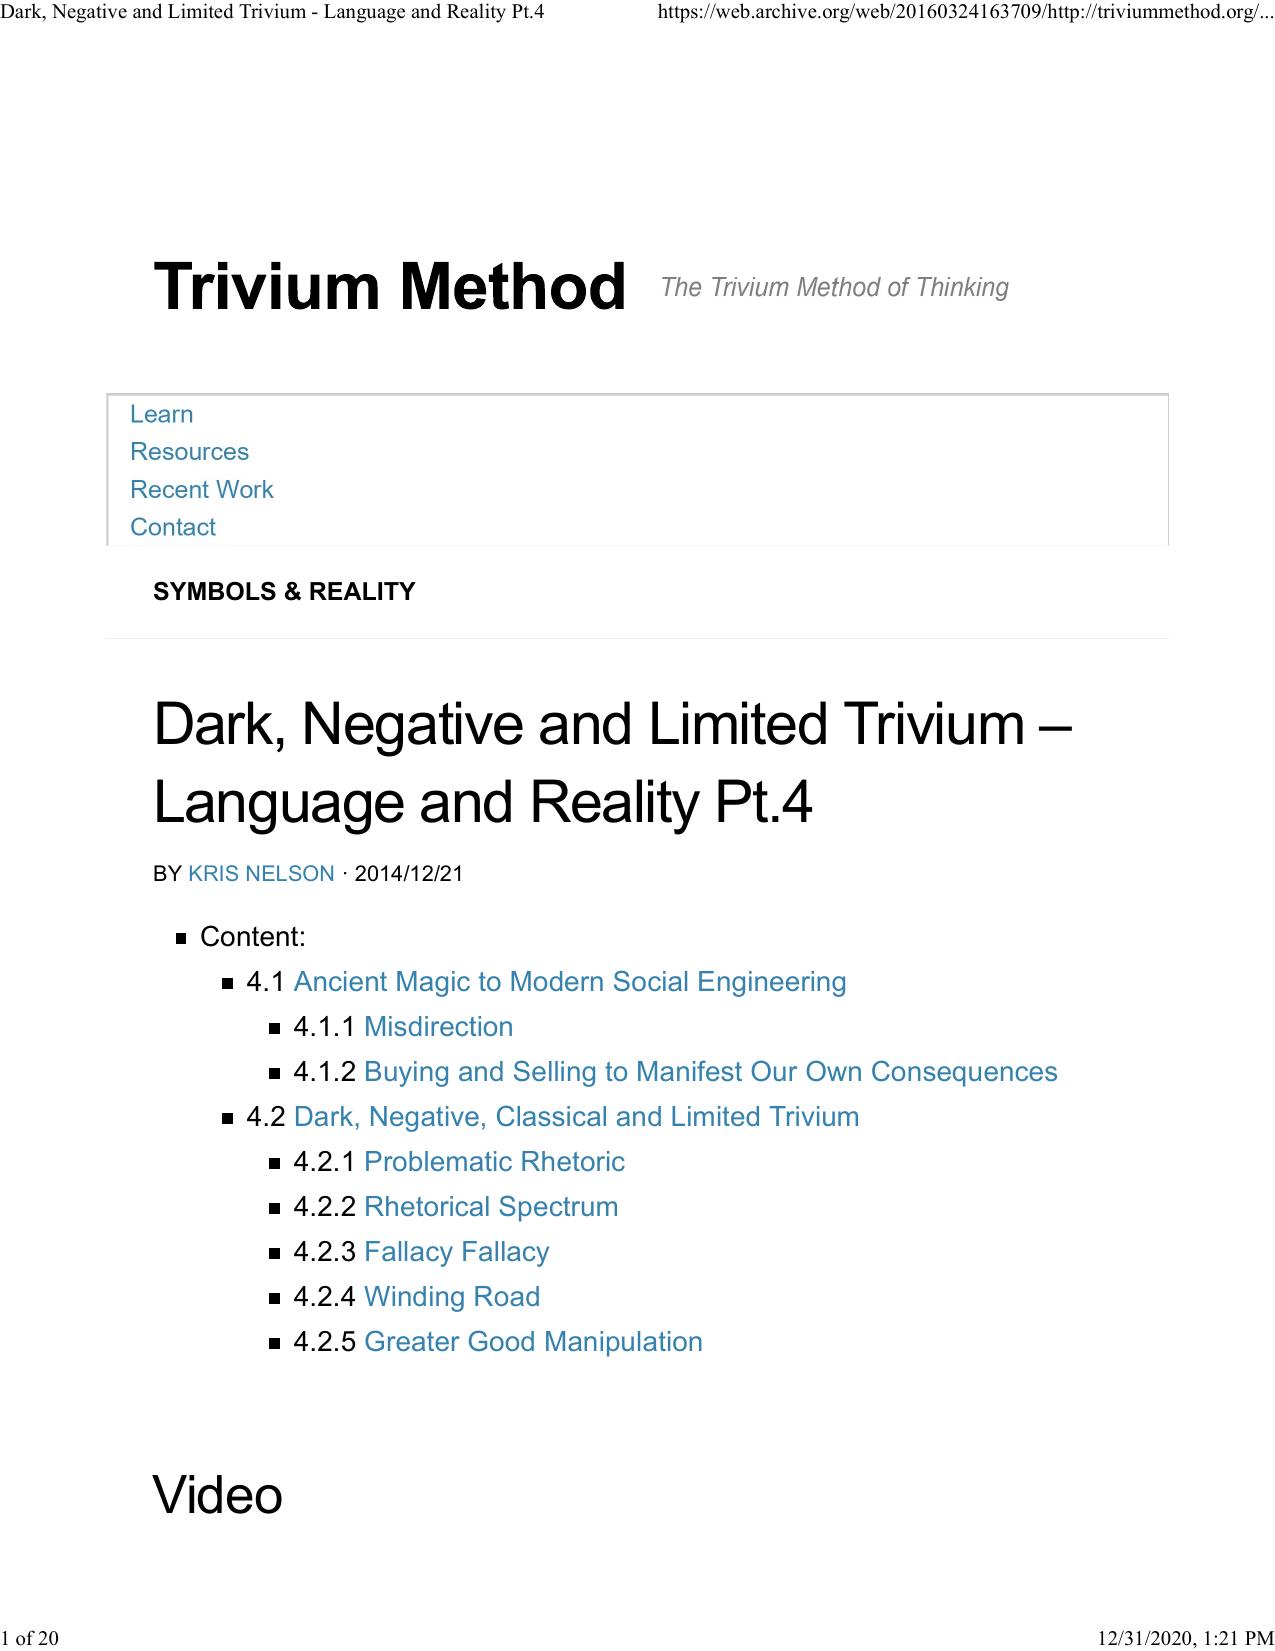 Dark, Negative and Limited Trivium - Language and Reality Pt.4